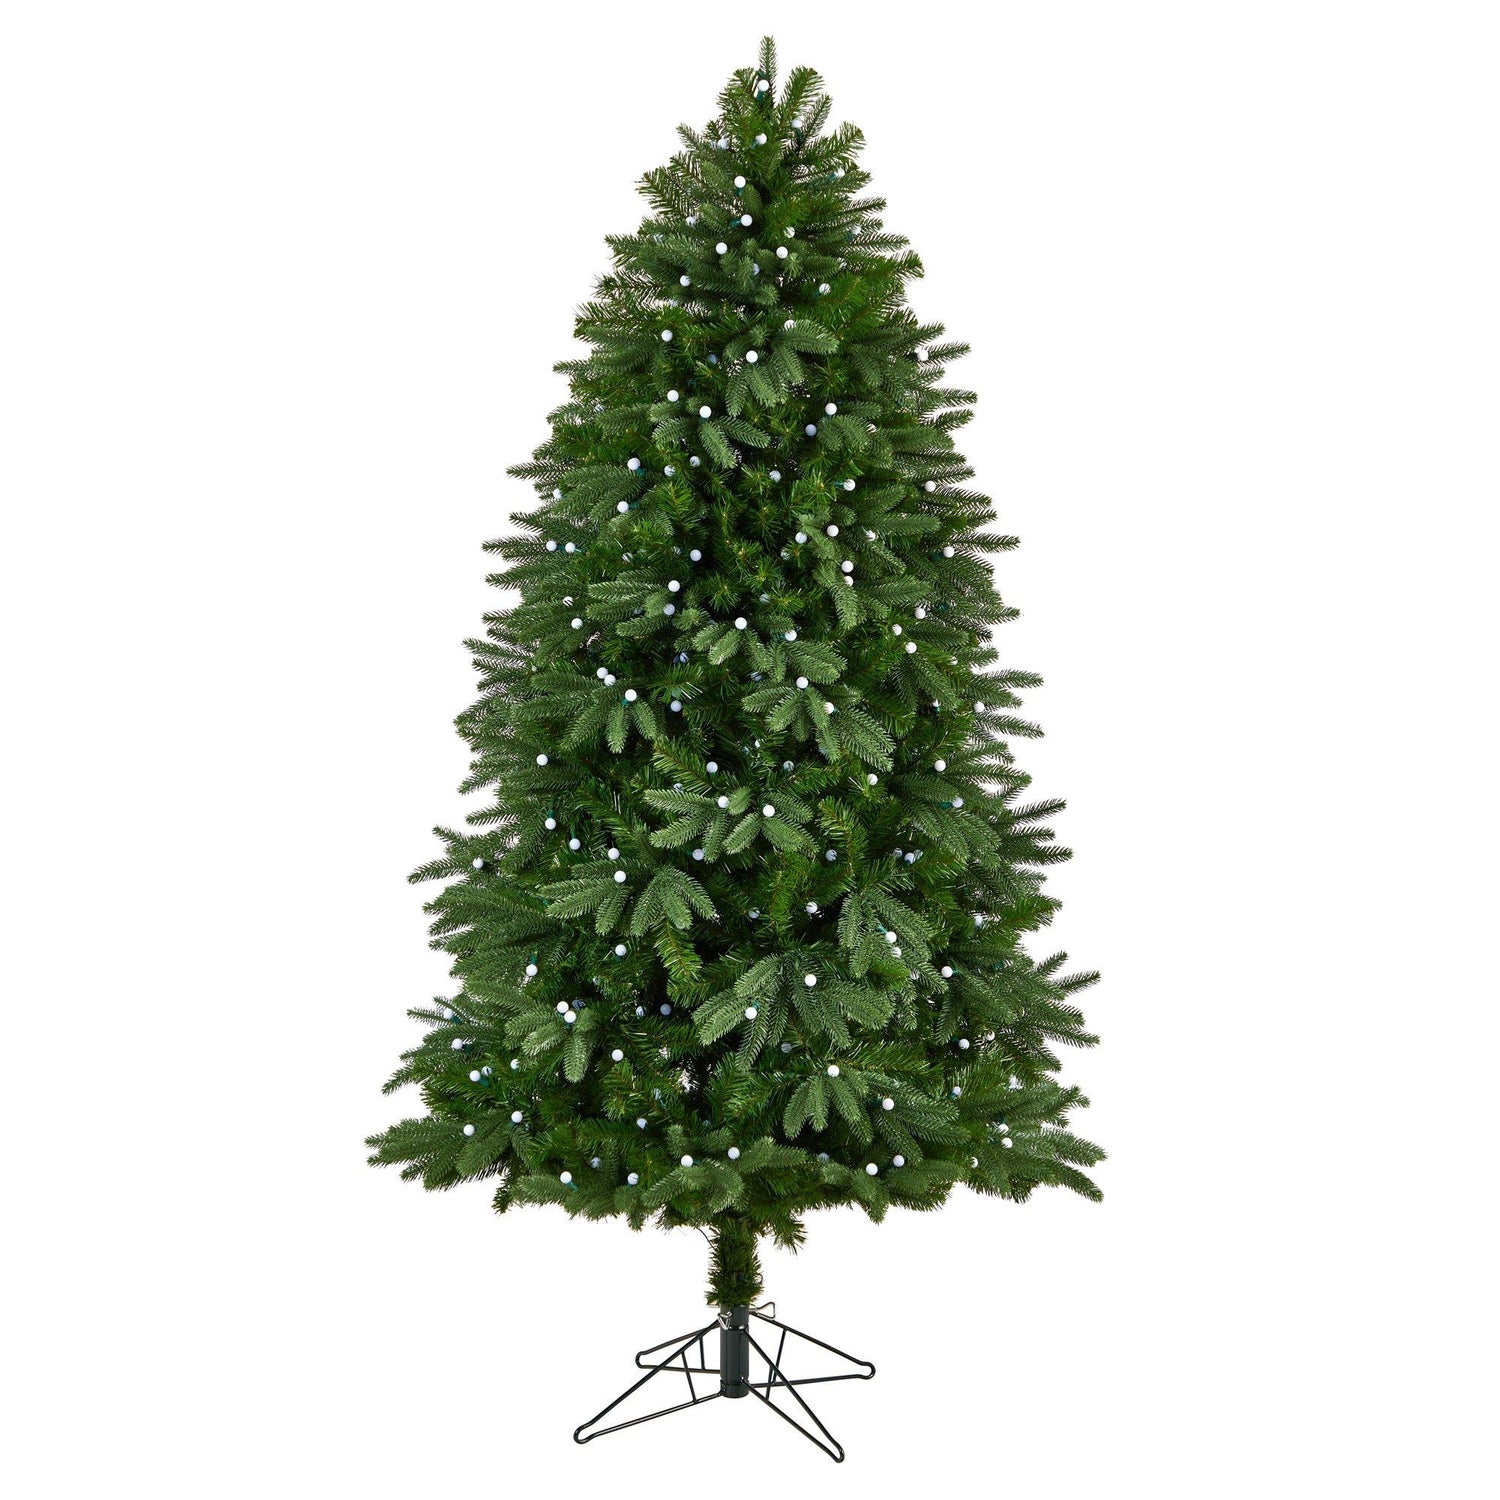 6.5’ Fraser Fir Christmas Tree with 550 Gum Ball LED Lights with Instant Connect Technology and 965 Branches